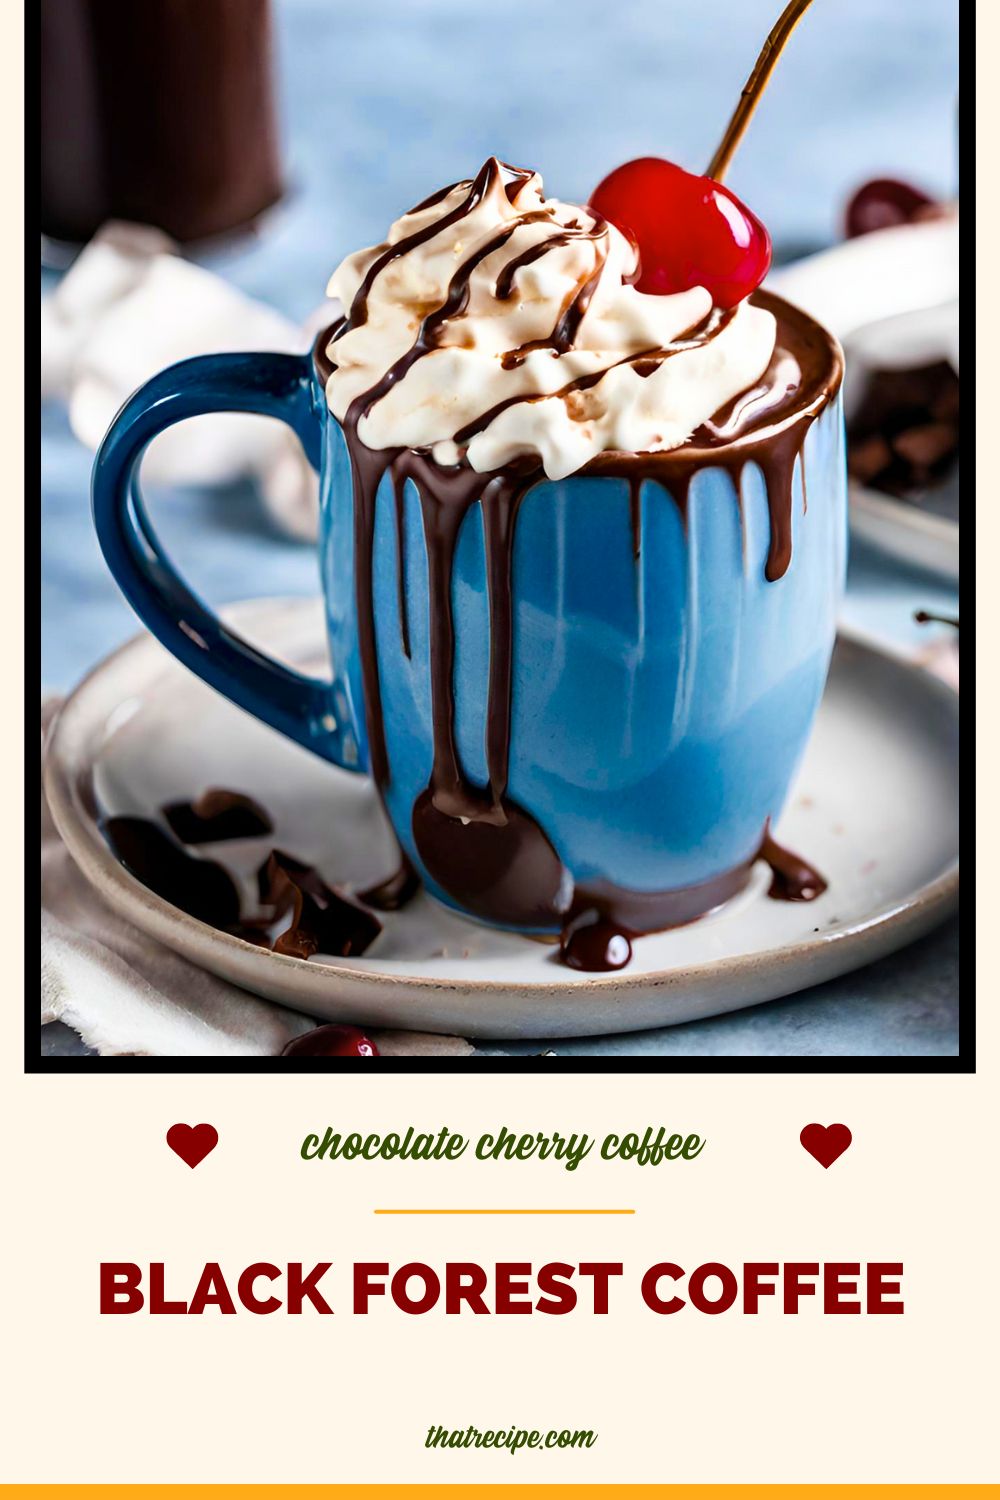 cup of whipped cream covered coffee with text overlay "black forest coffee chocolate cherry coffee"